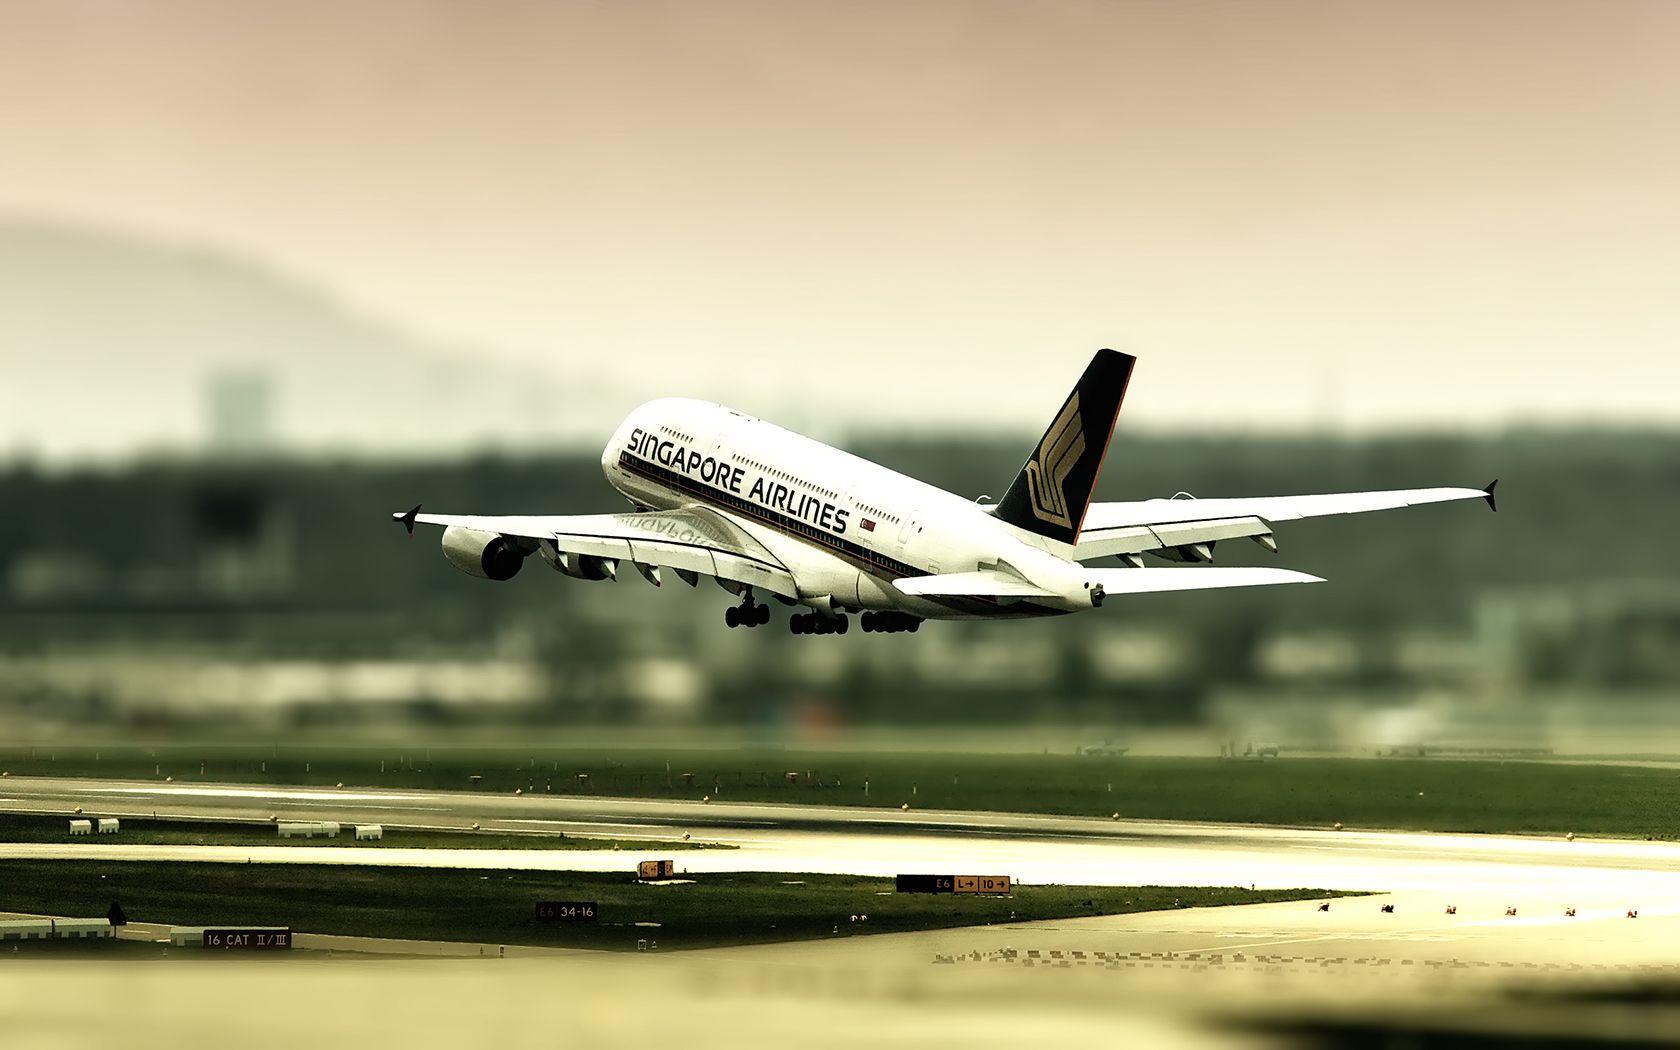 Singapore Airlines Wallpapers Top Free Singapore Airlines Images, Photos, Reviews